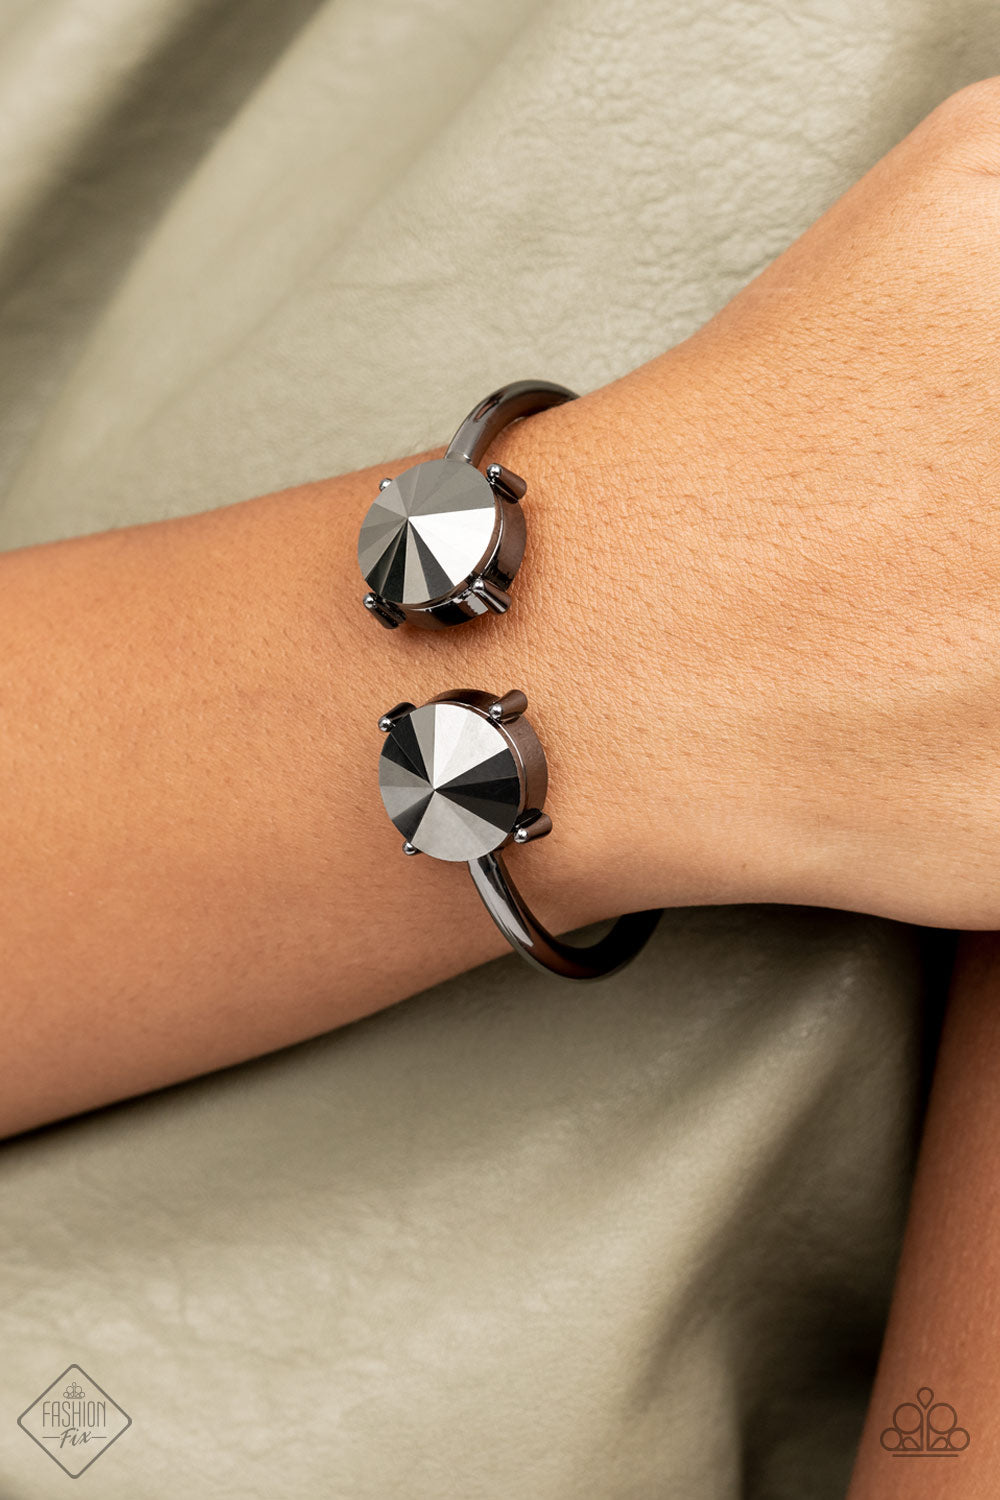 Paparazzi Spark and Sizzle Black Hinge Cuff Bracelet - Fashion Fix Magnificent Musings September 2021